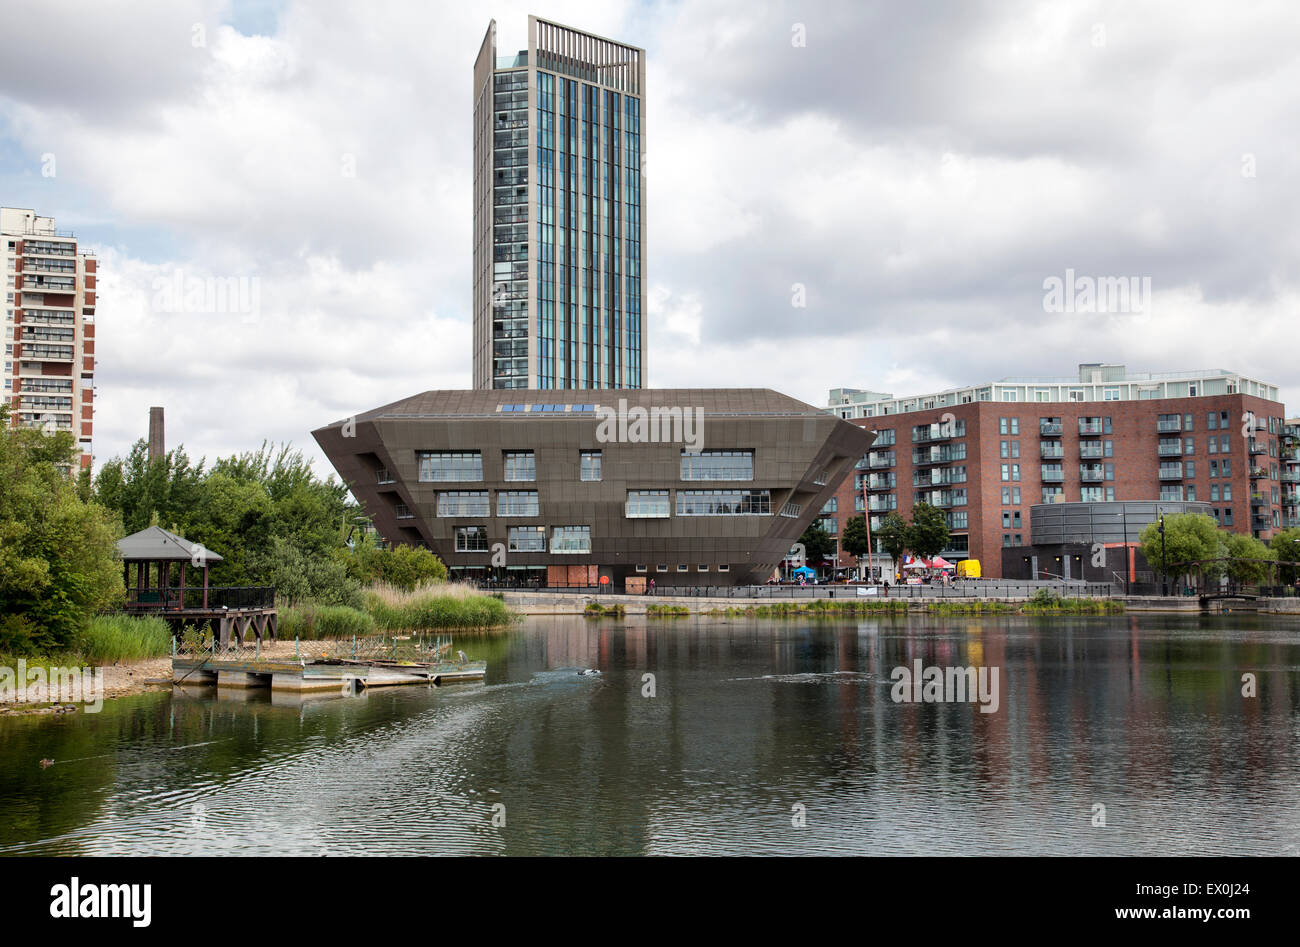 Canada Water Library Building Across Rotherhithe Angling Club Pond in Rotherhithe - London UK Stock Photo